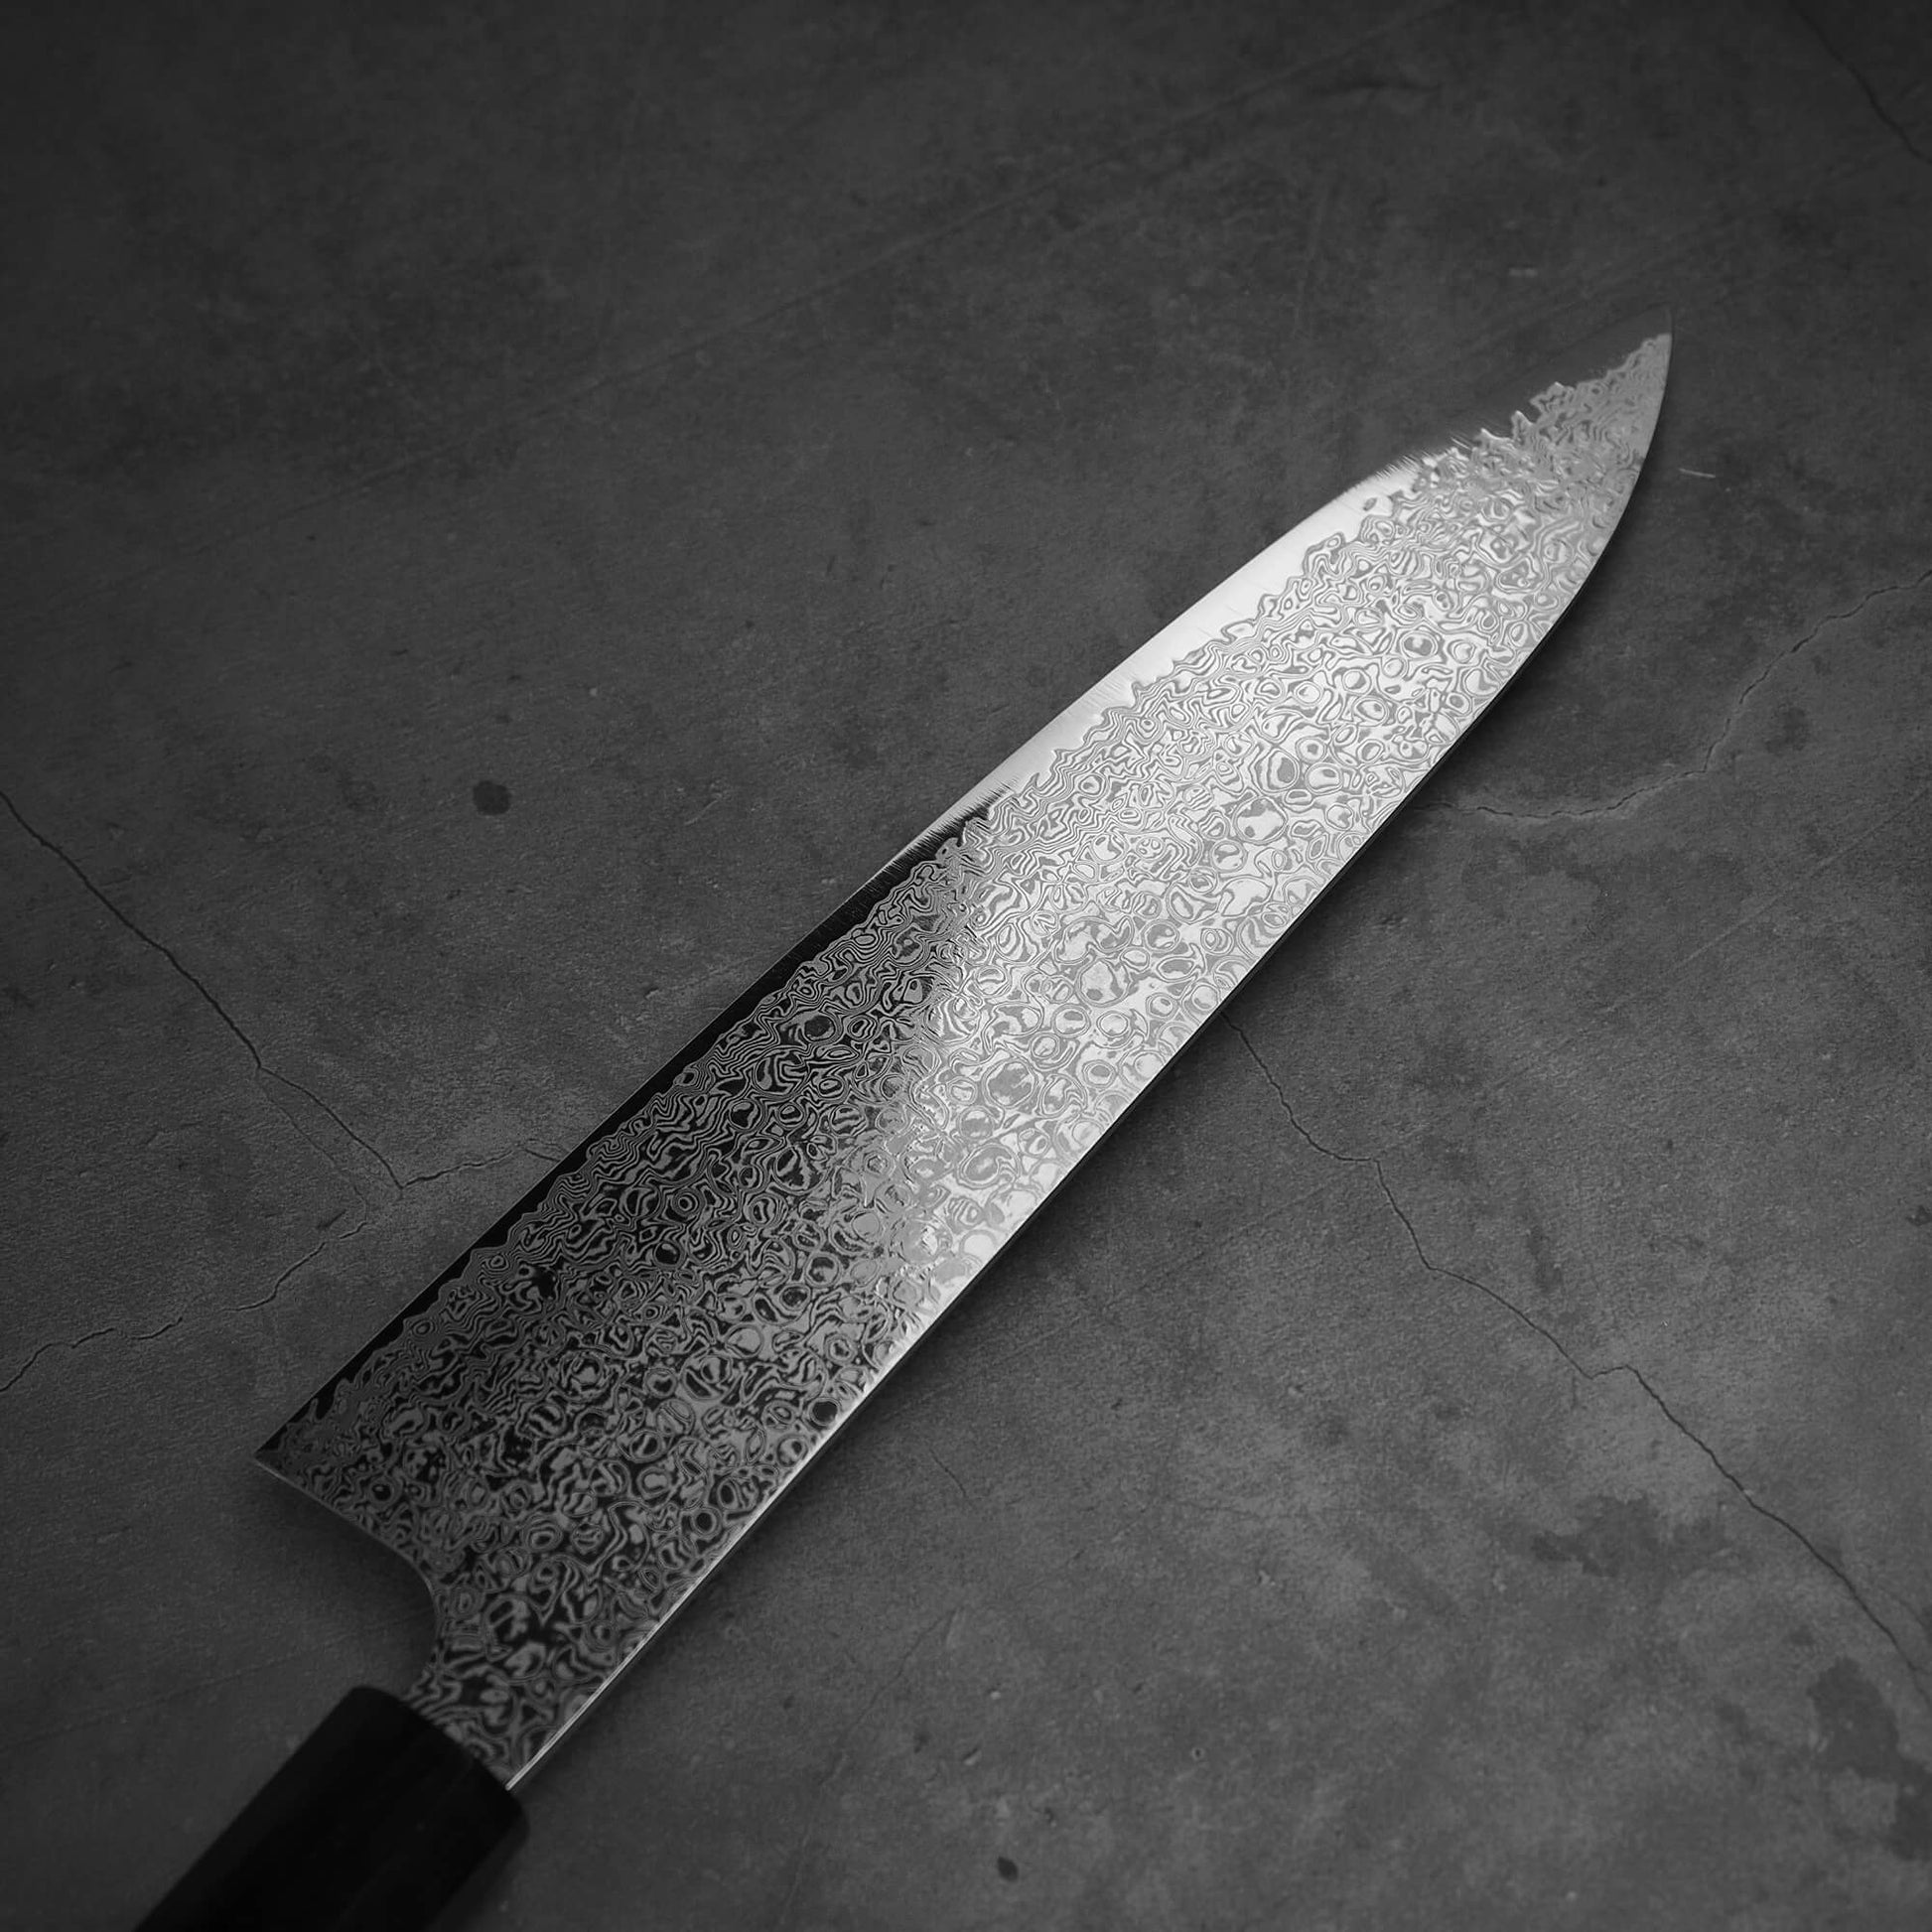 Top view of Hatsukokoro ginsan damascus gyuto 240mm. Image focuses on the left side of the blade.